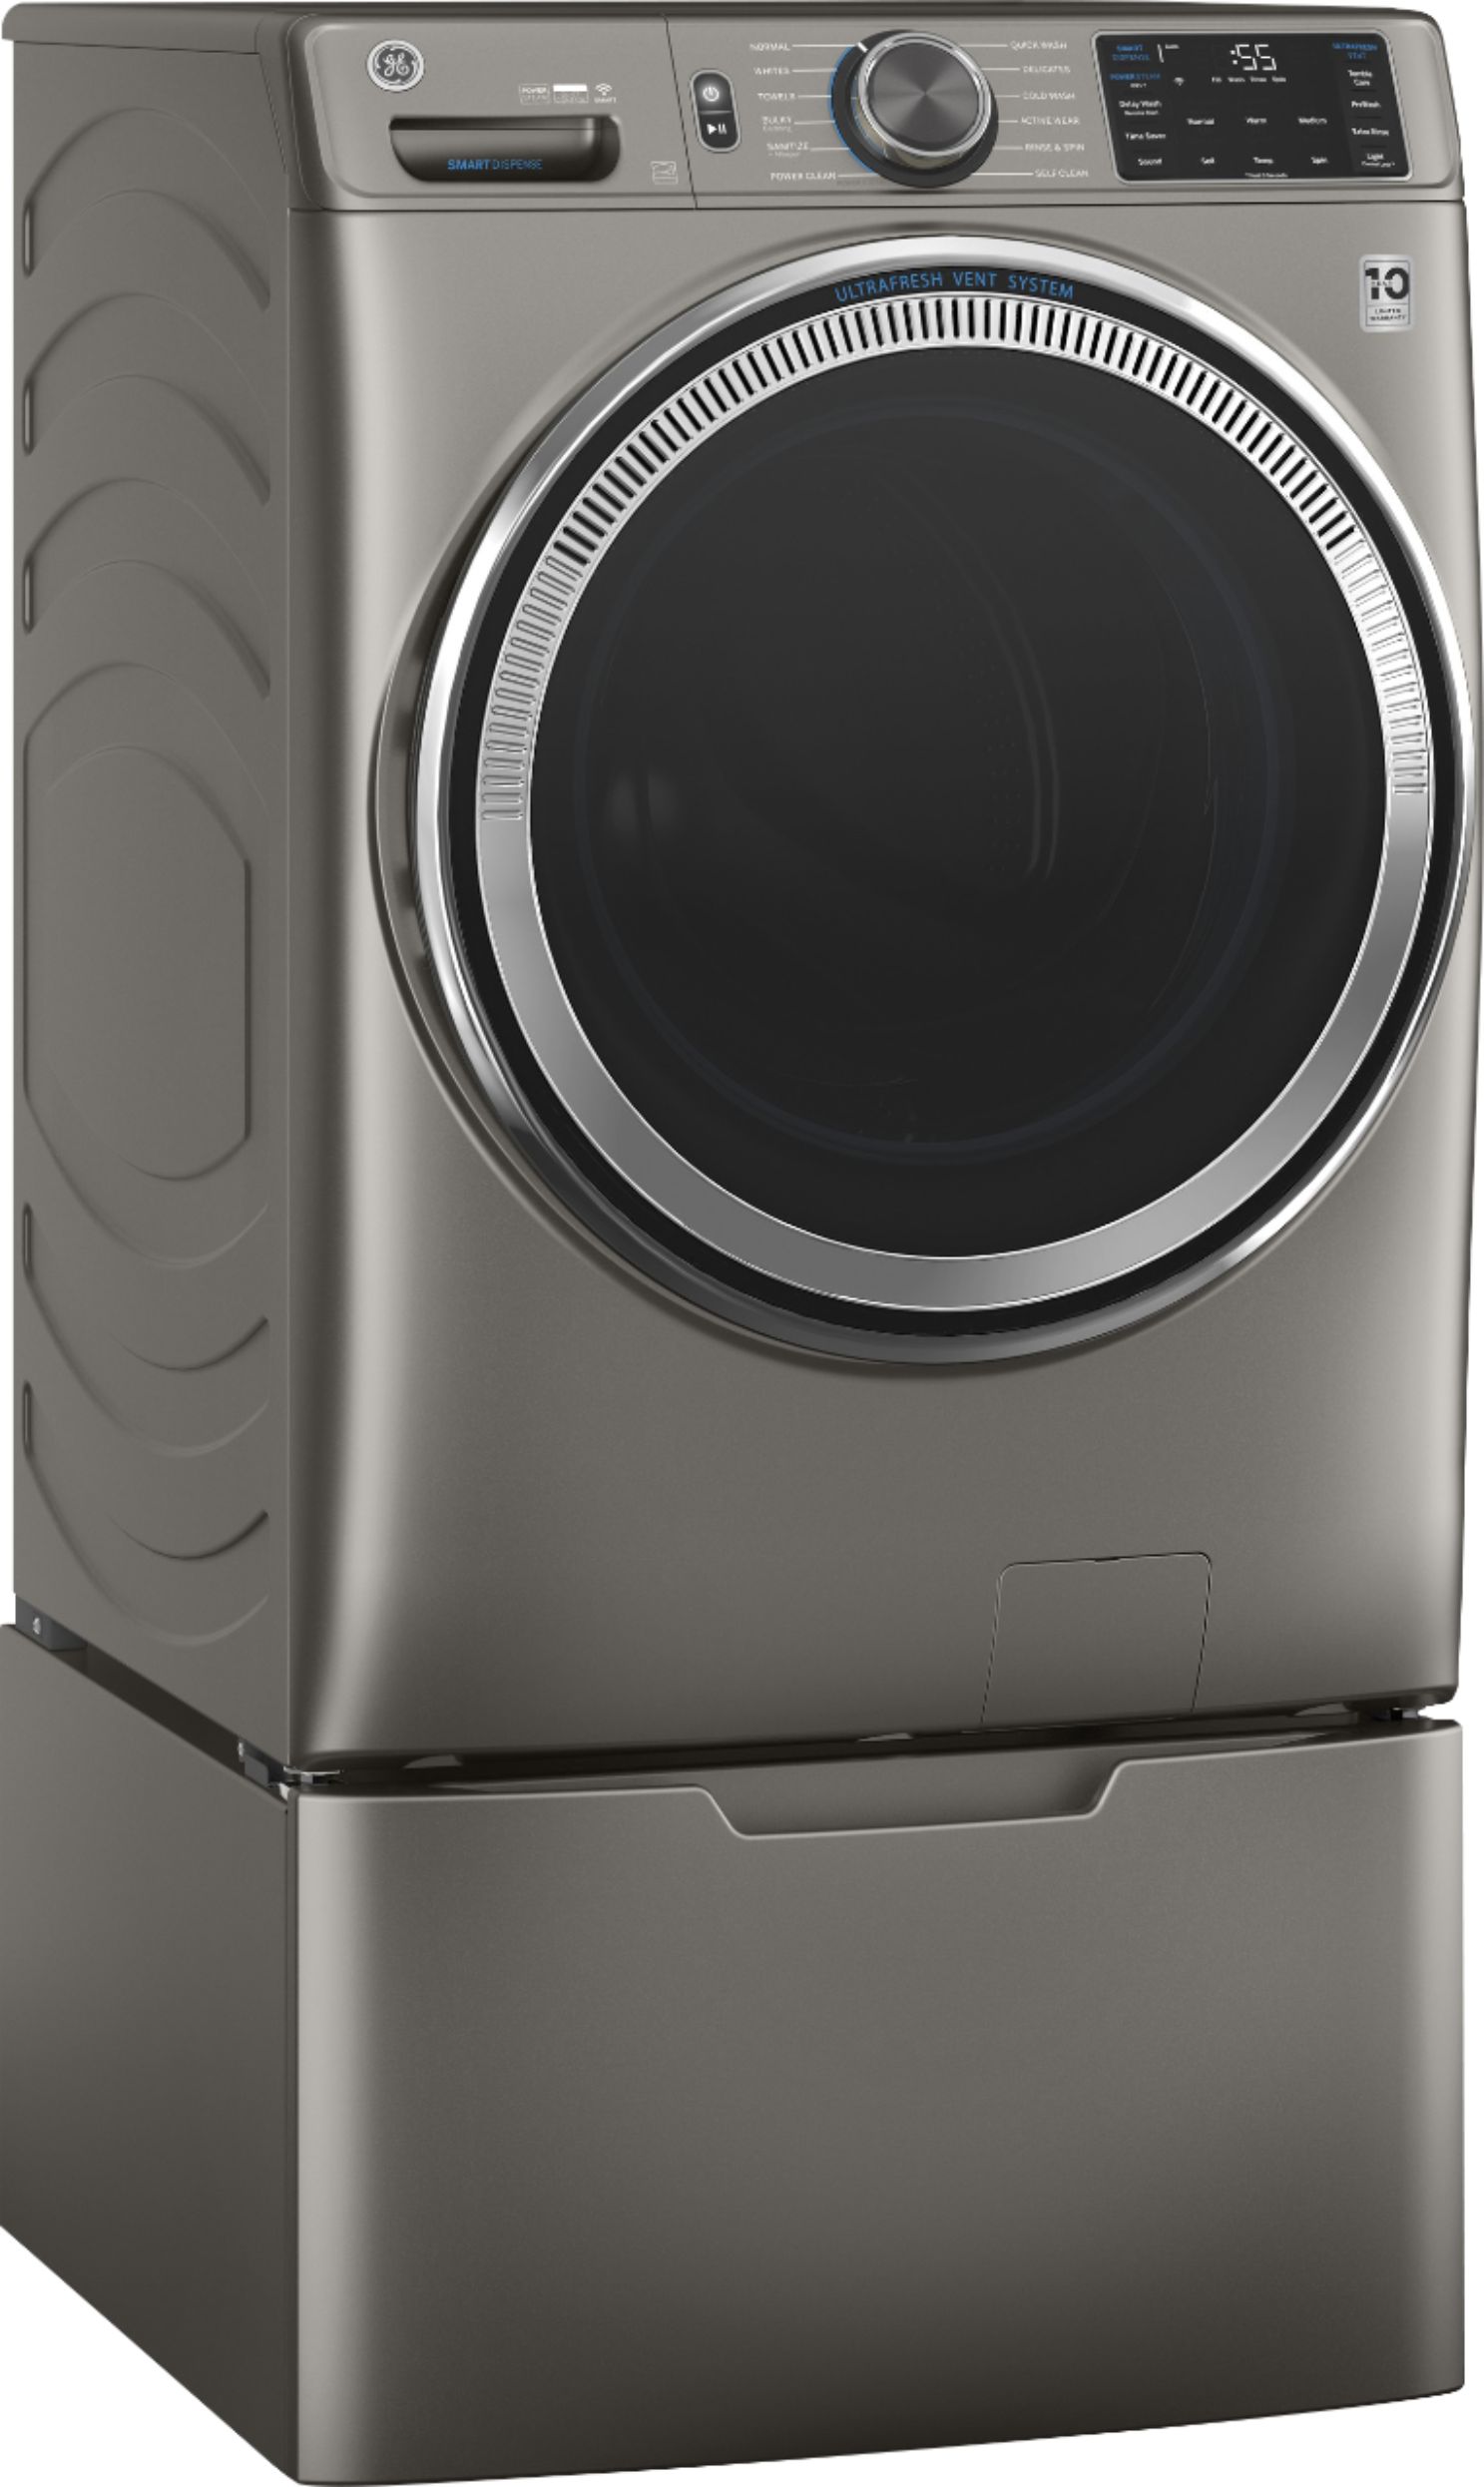 Angle View: GE - 4.8 Cu Ft High-Efficiency Stackable Smart Front Load Washer w/UltraFresh Vent, Microban Antimicrobial & SmartDispense - Satin nickel